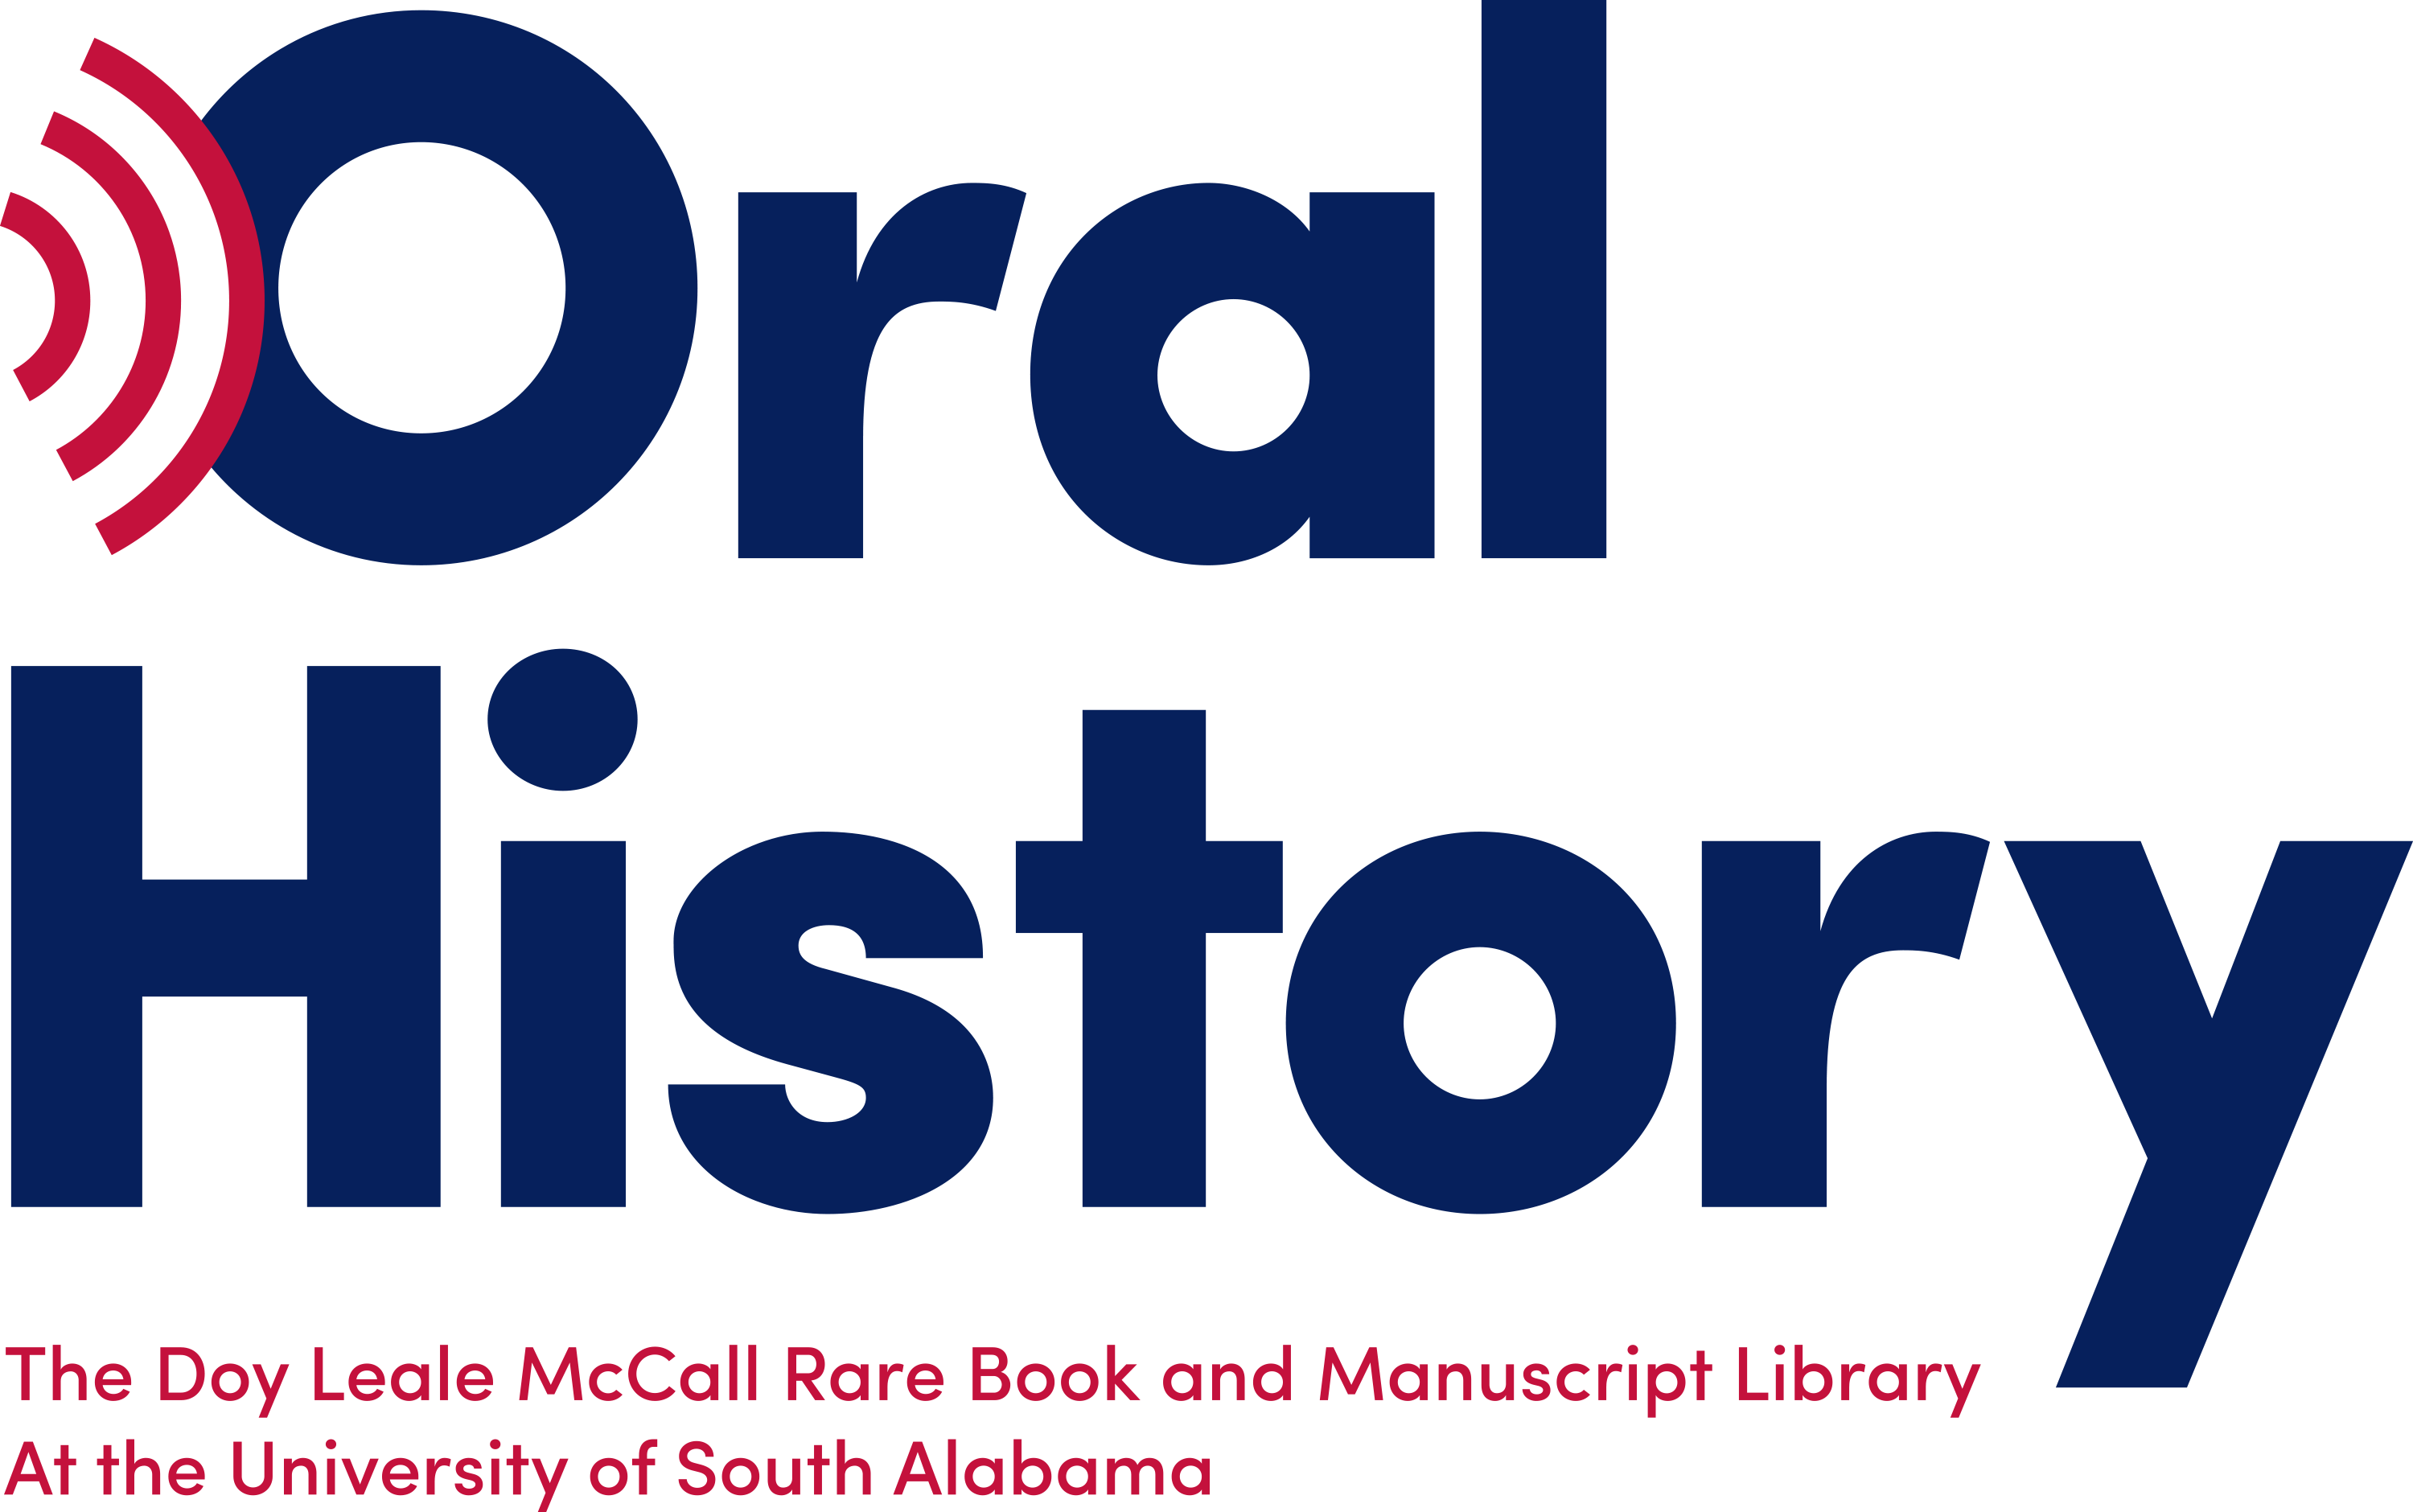 Oral History Collections